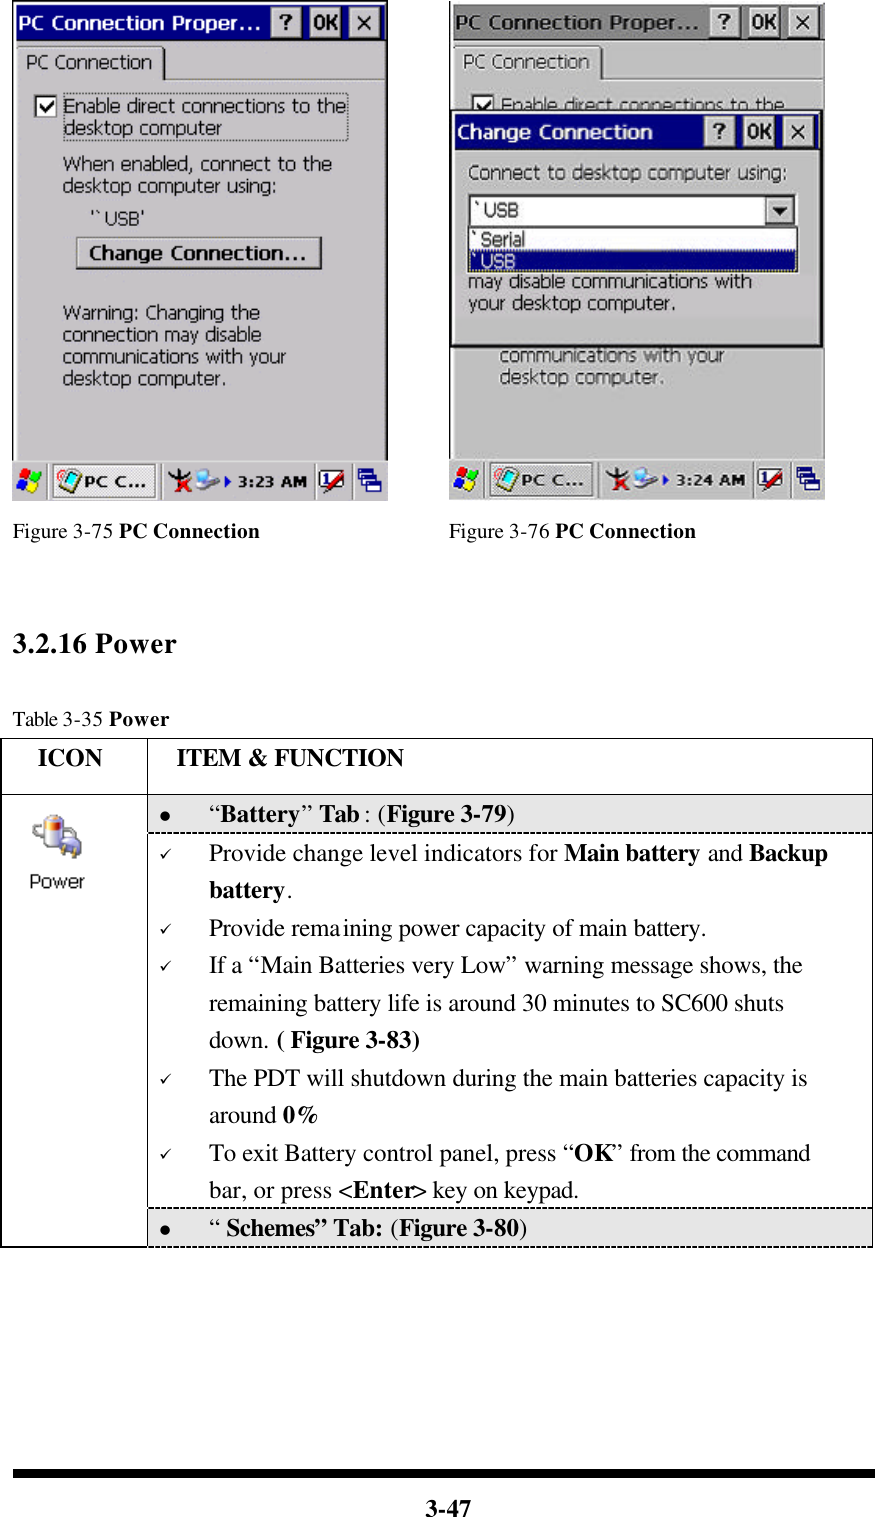  3-47    Figure 3-75 PC Connection Figure 3-76 PC Connection   3.2.16 Power  Table 3-35 Power   ICON  ITEM &amp; FUNCTION l “Battery” Tab : (Figure 3-79) ü Provide change level indicators for Main battery and Backup battery. ü Provide remaining power capacity of main battery. ü If a “Main Batteries very Low” warning message shows, the remaining battery life is around 30 minutes to SC600 shuts down. ( Figure 3-83) ü The PDT will shutdown during the main batteries capacity is around 0% ü To exit Battery control panel, press “OK” from the command bar, or press &lt;Enter&gt; key on keypad.  l “ Schemes” Tab: (Figure 3-80) 